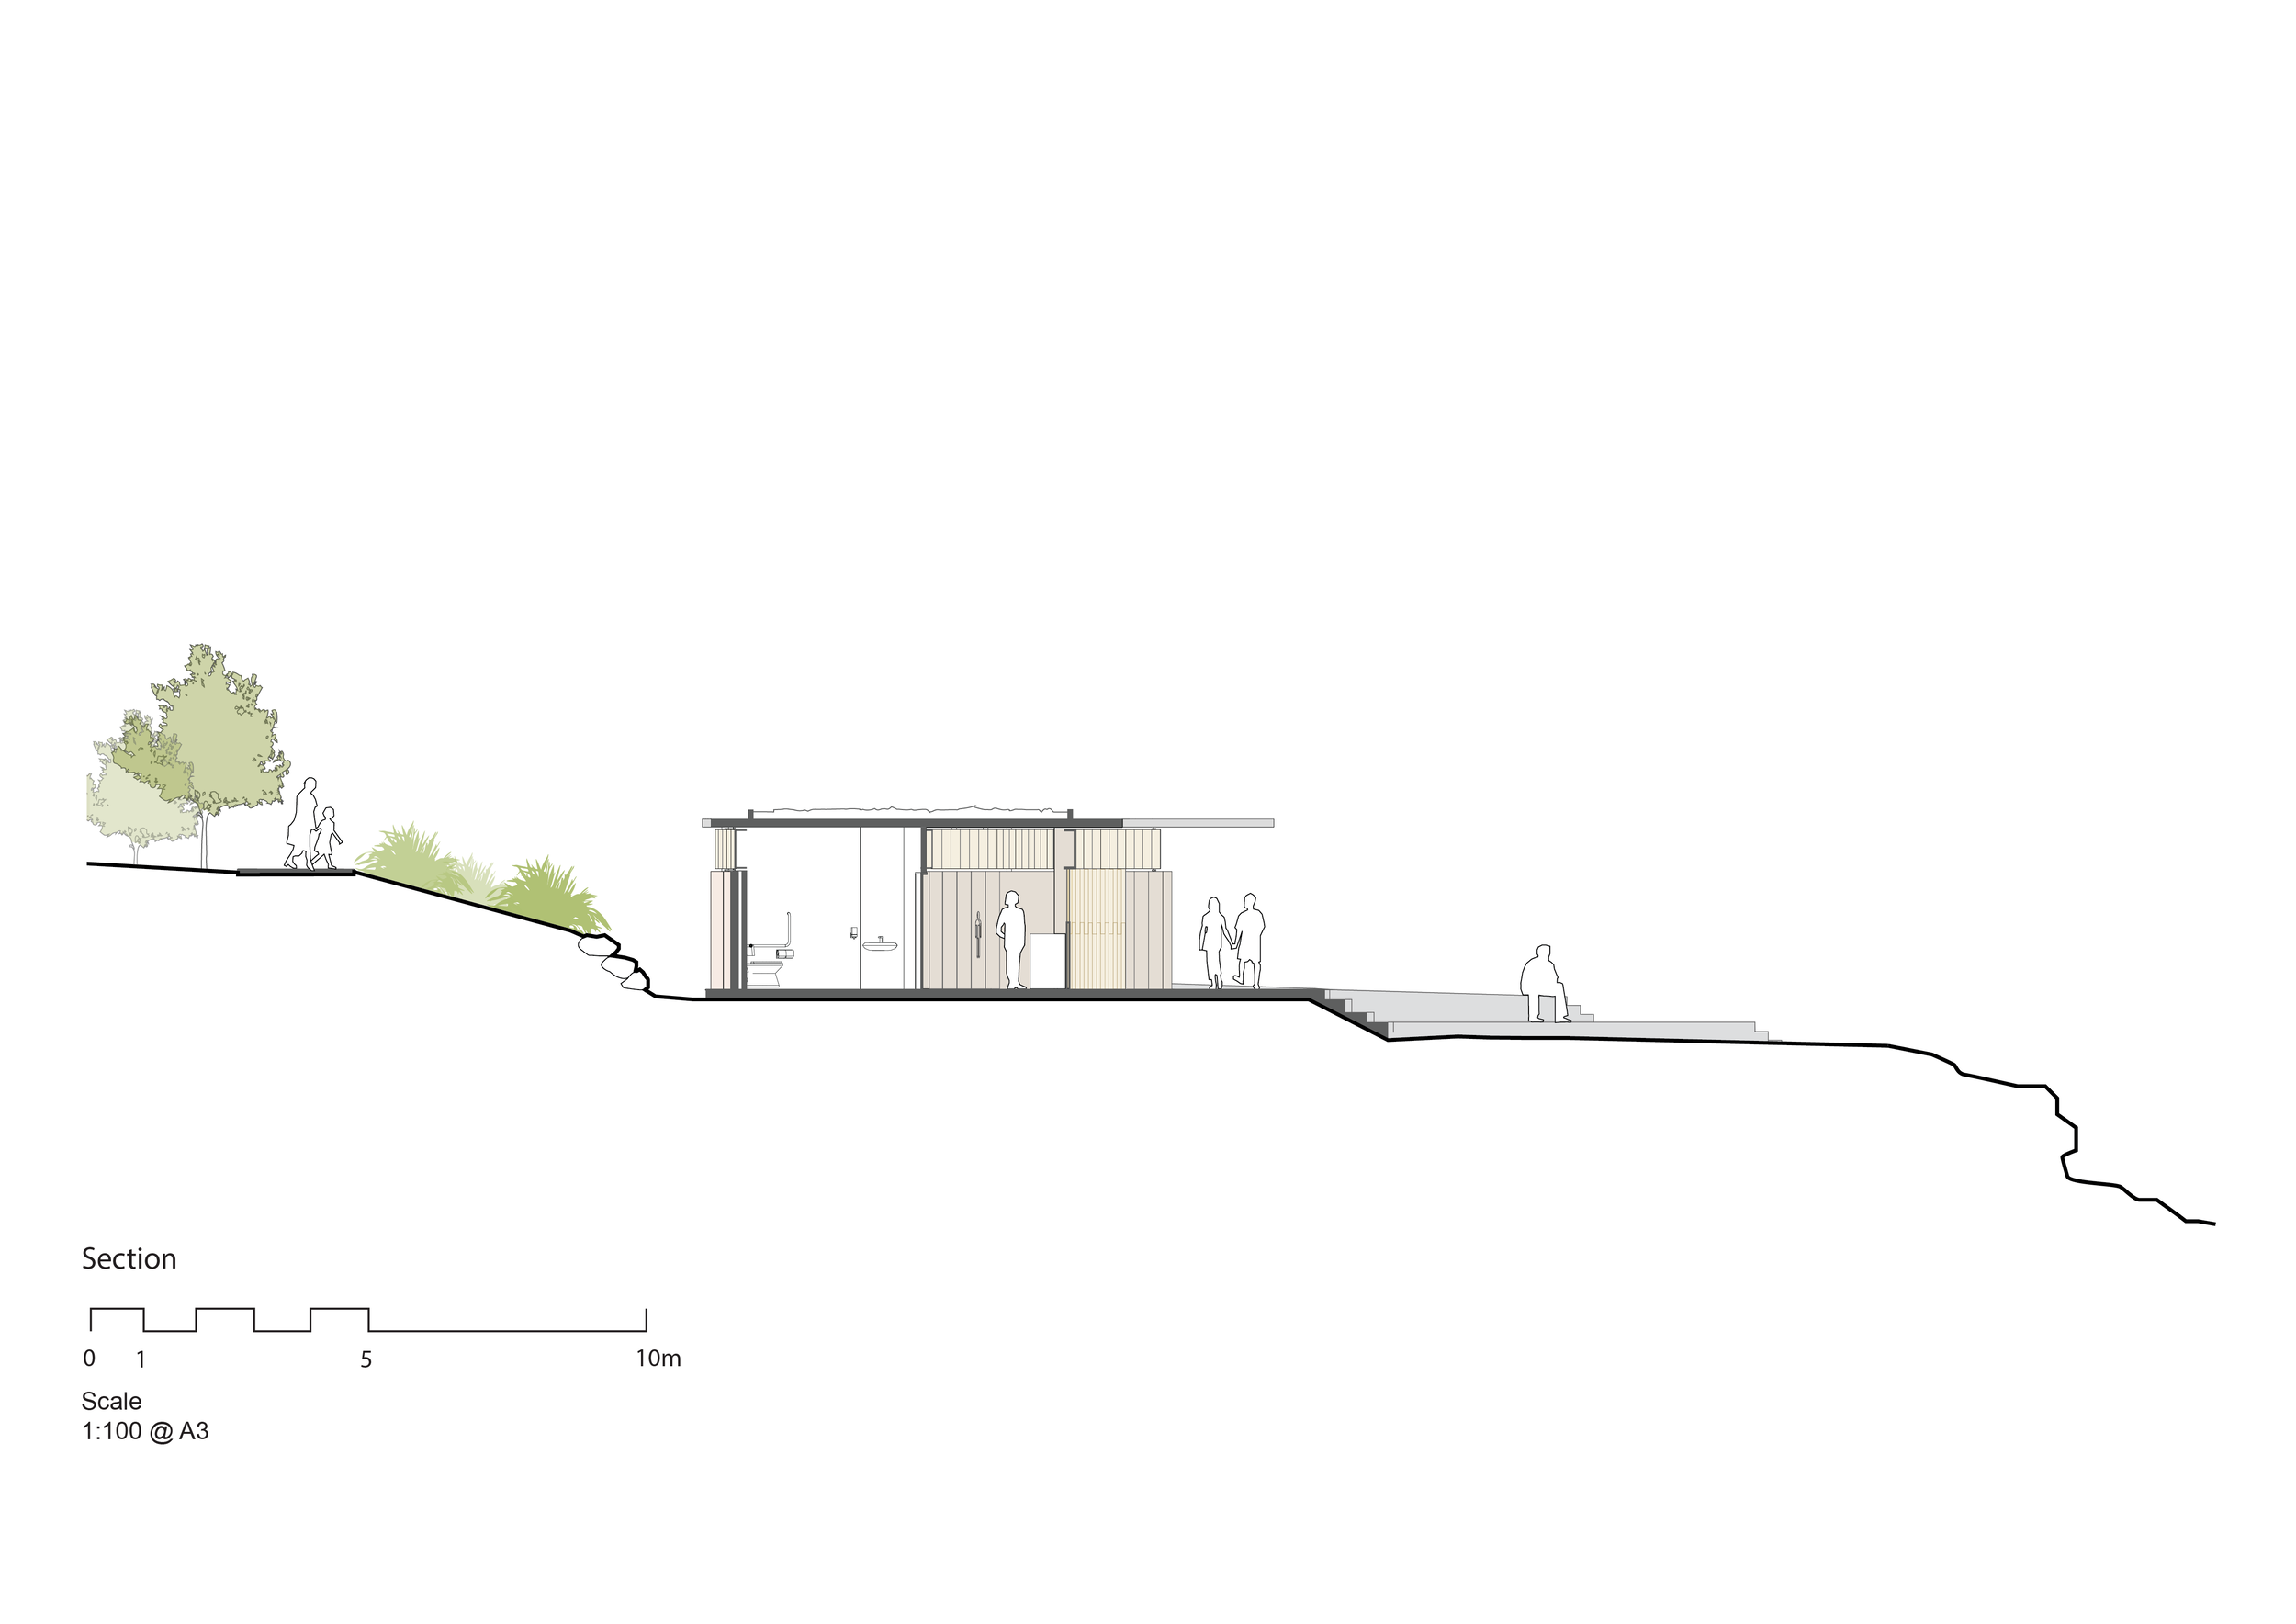 4072-Small_MahonPool_LahznimmoArchitects_12 Section.png